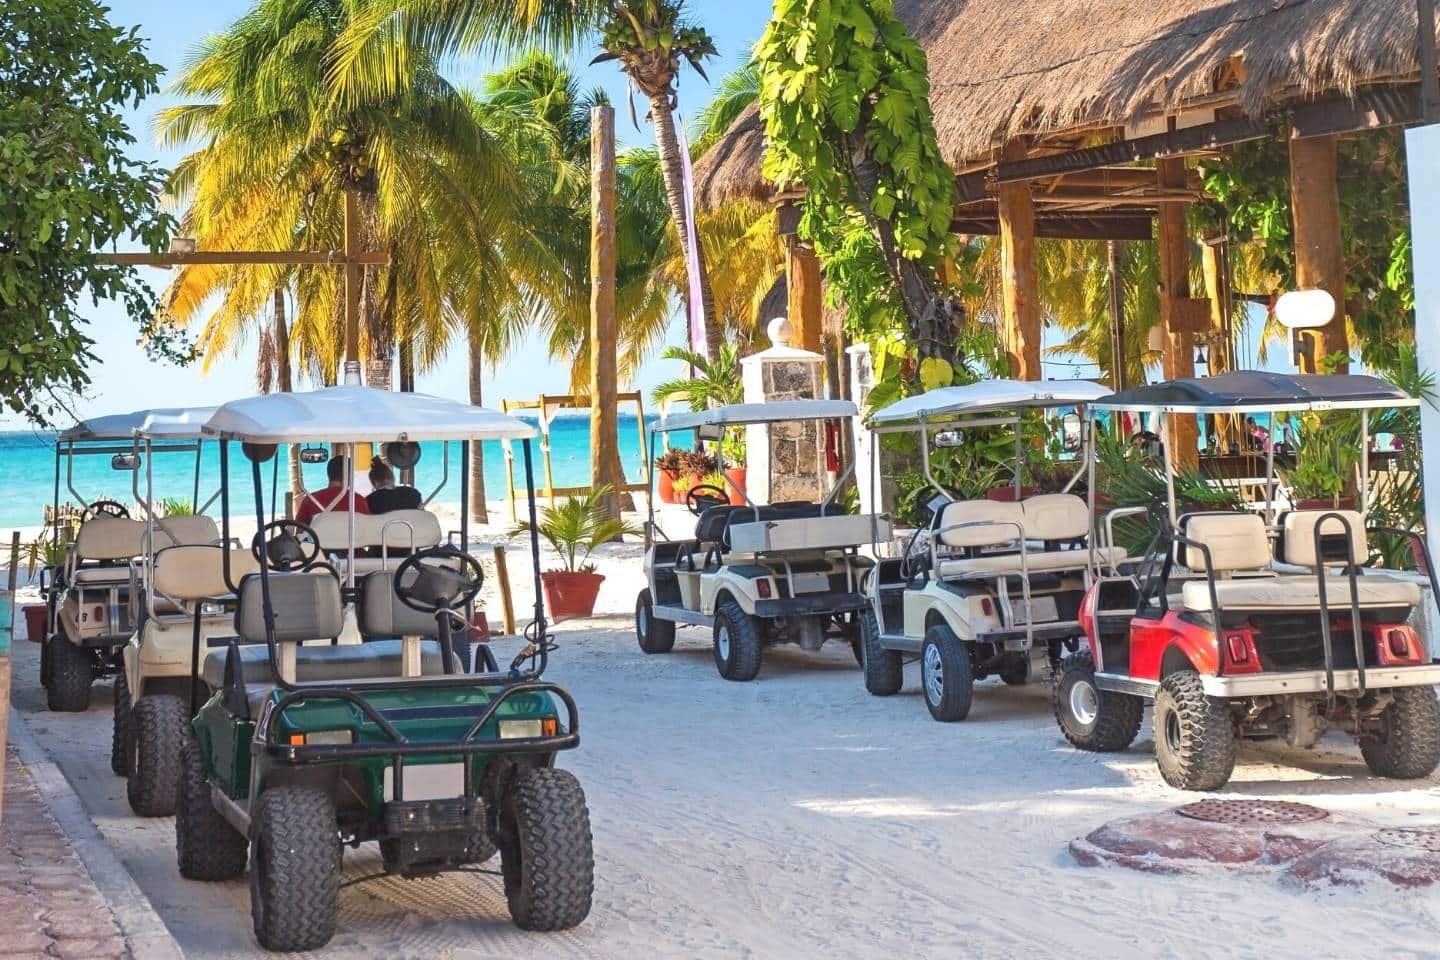 Row of golf carts in Mexico